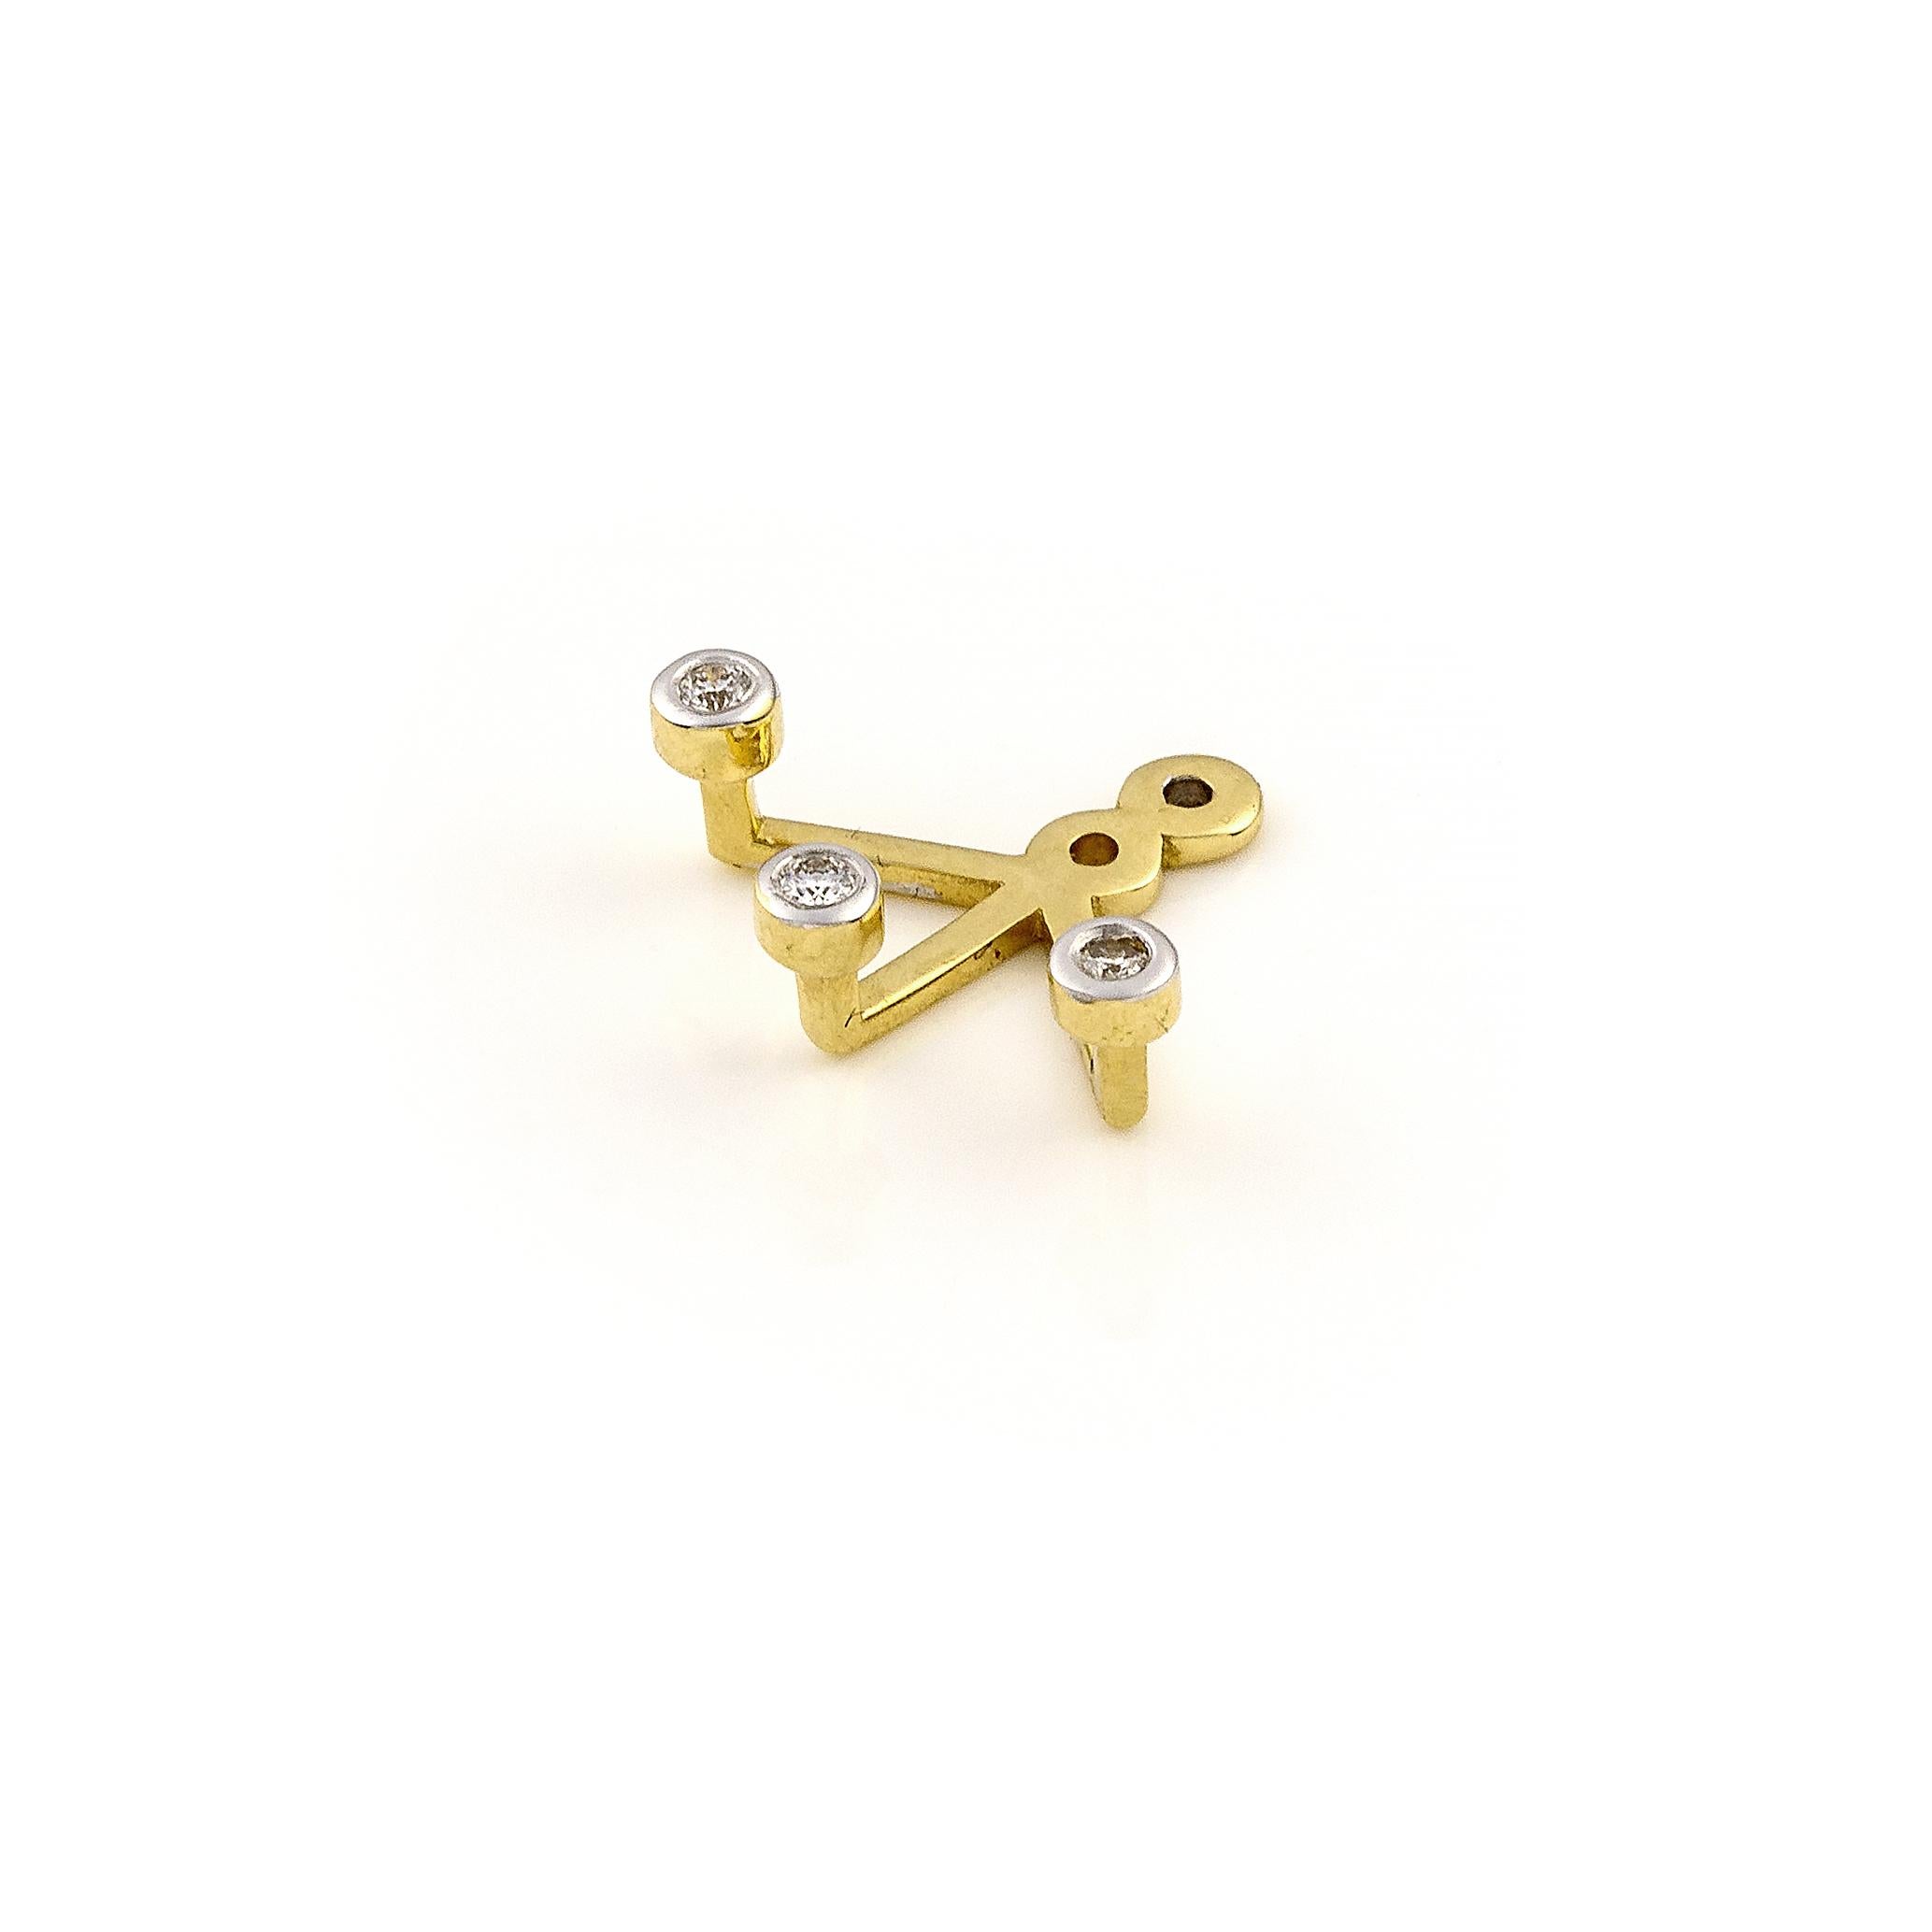 Recycled 14K White Gold

Diamonds Approx. 0.07 ct

Single Three Diamond Stud Accessory -Ear Jacket- in Yellow Gold and Diamonds

This collection combines the simplicity of the single piece with the opulence of diamonds.

All jewels in the Essentials